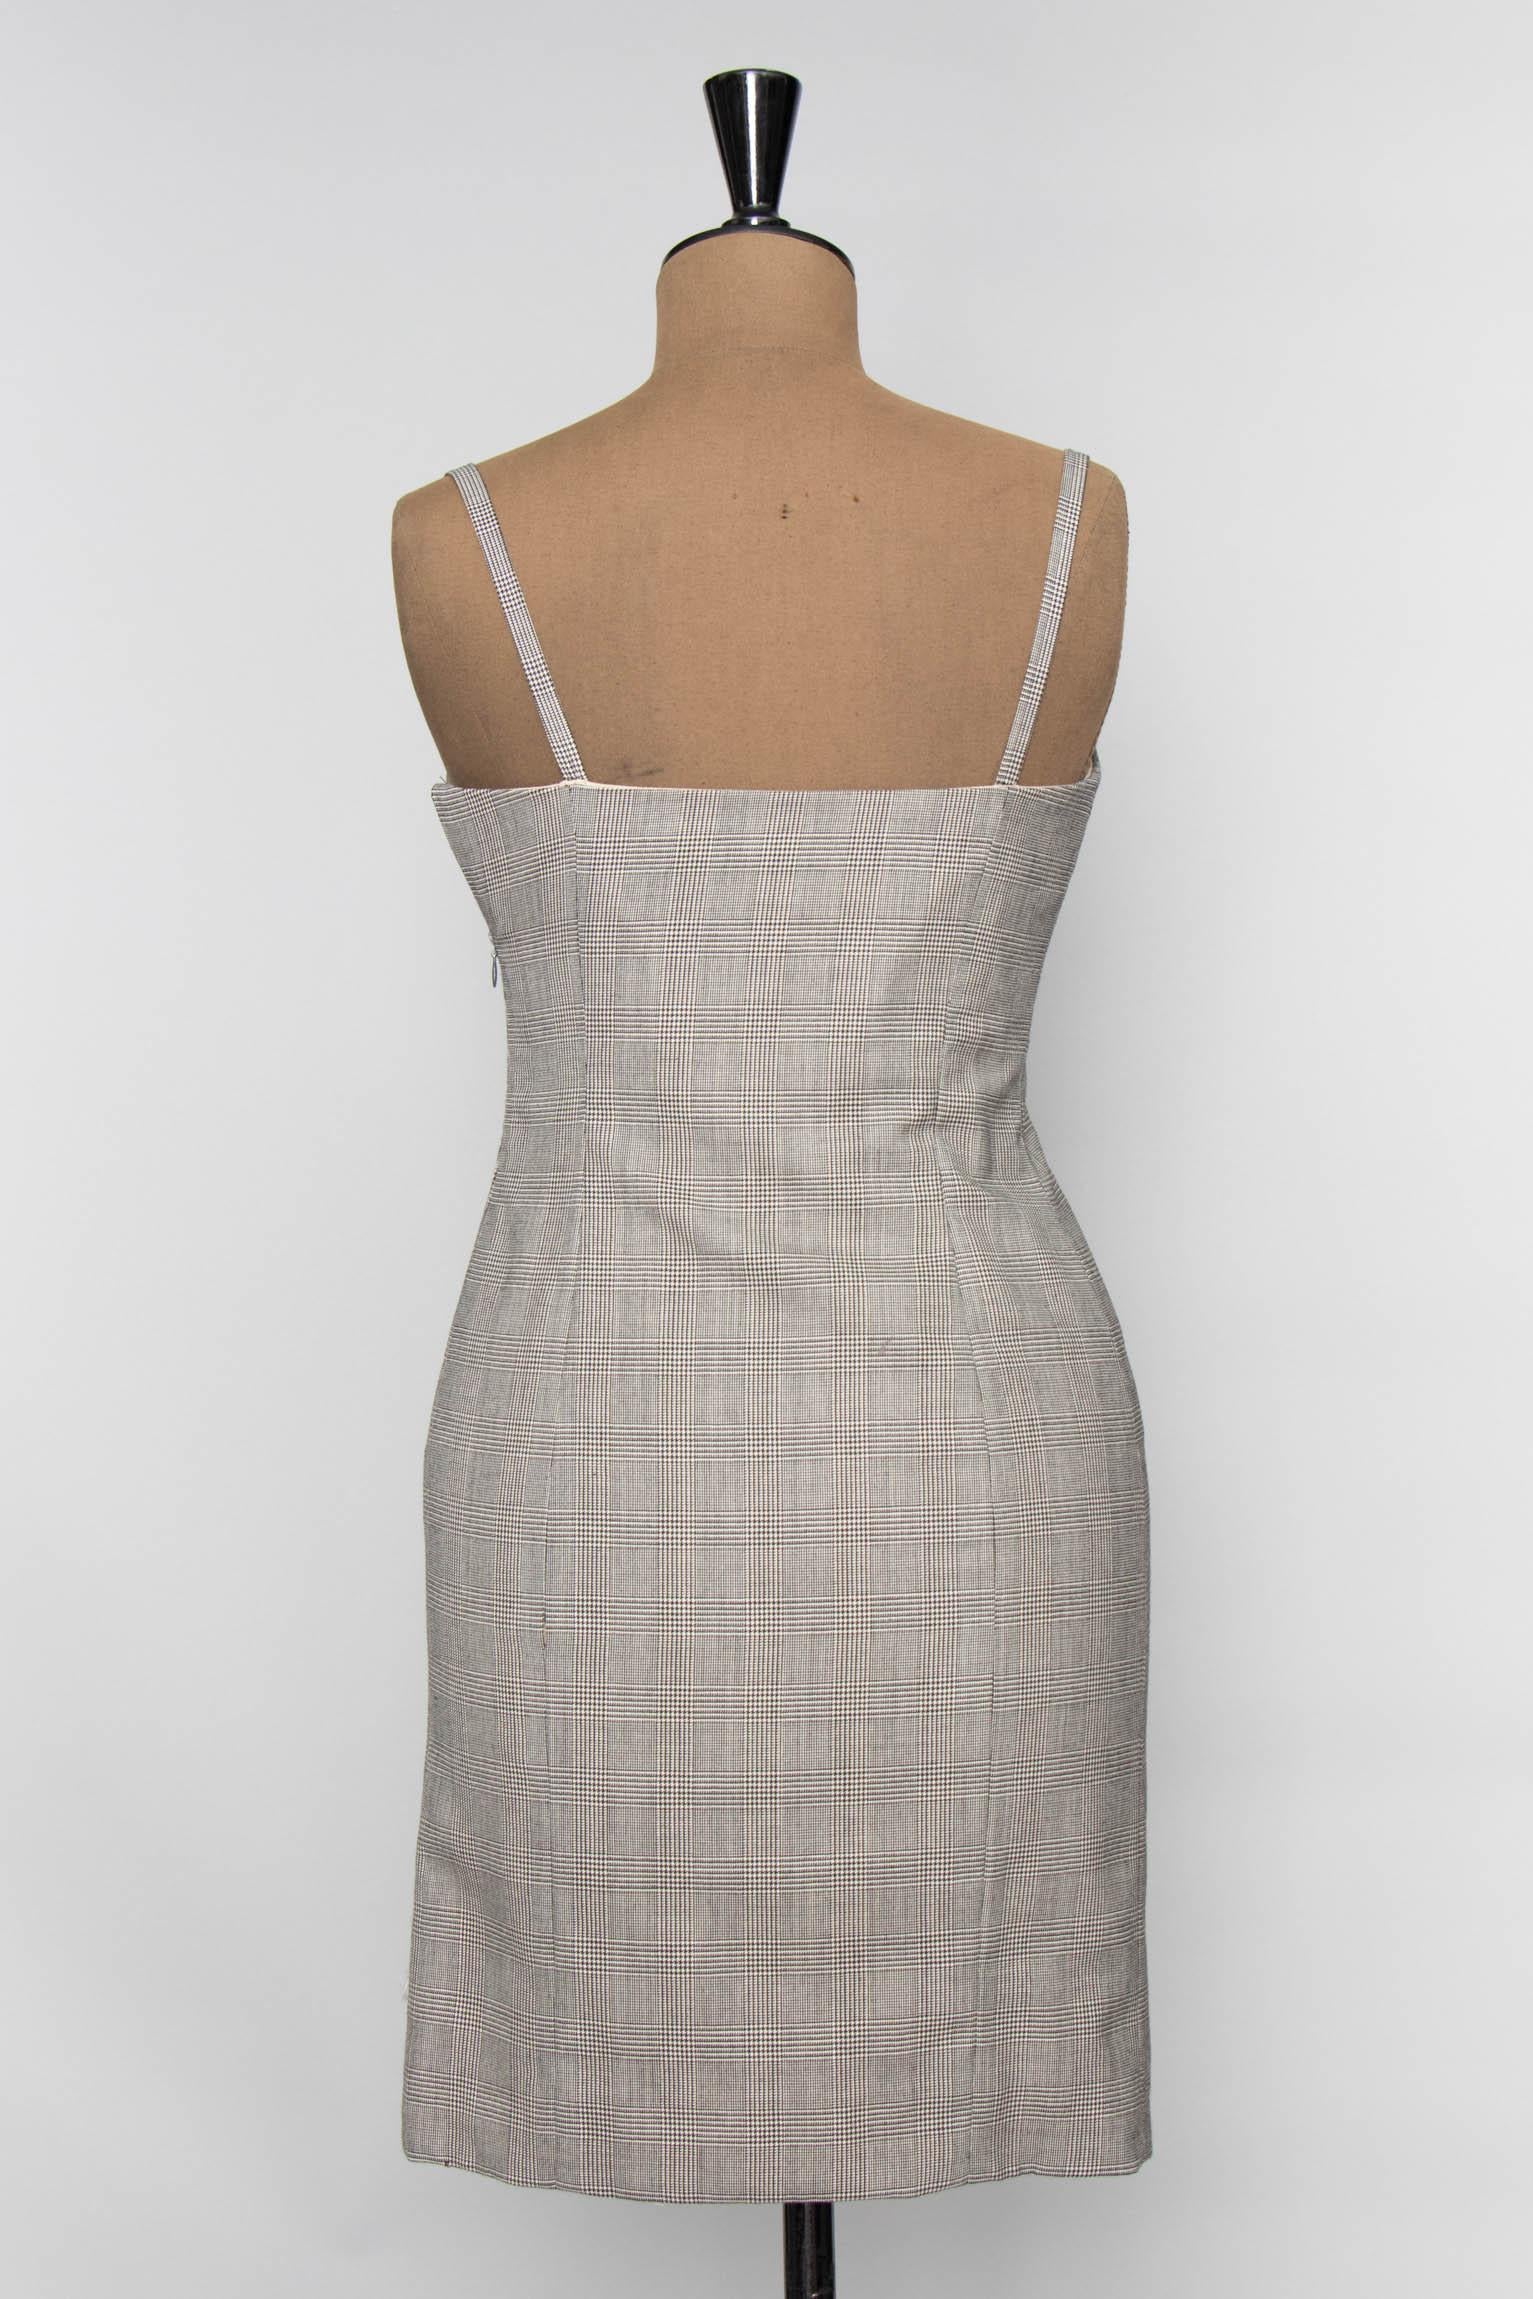 Gray A Spring 1998 Vintage Gianni Versace Houndstooth Plaid Bodycon Dress XS For Sale